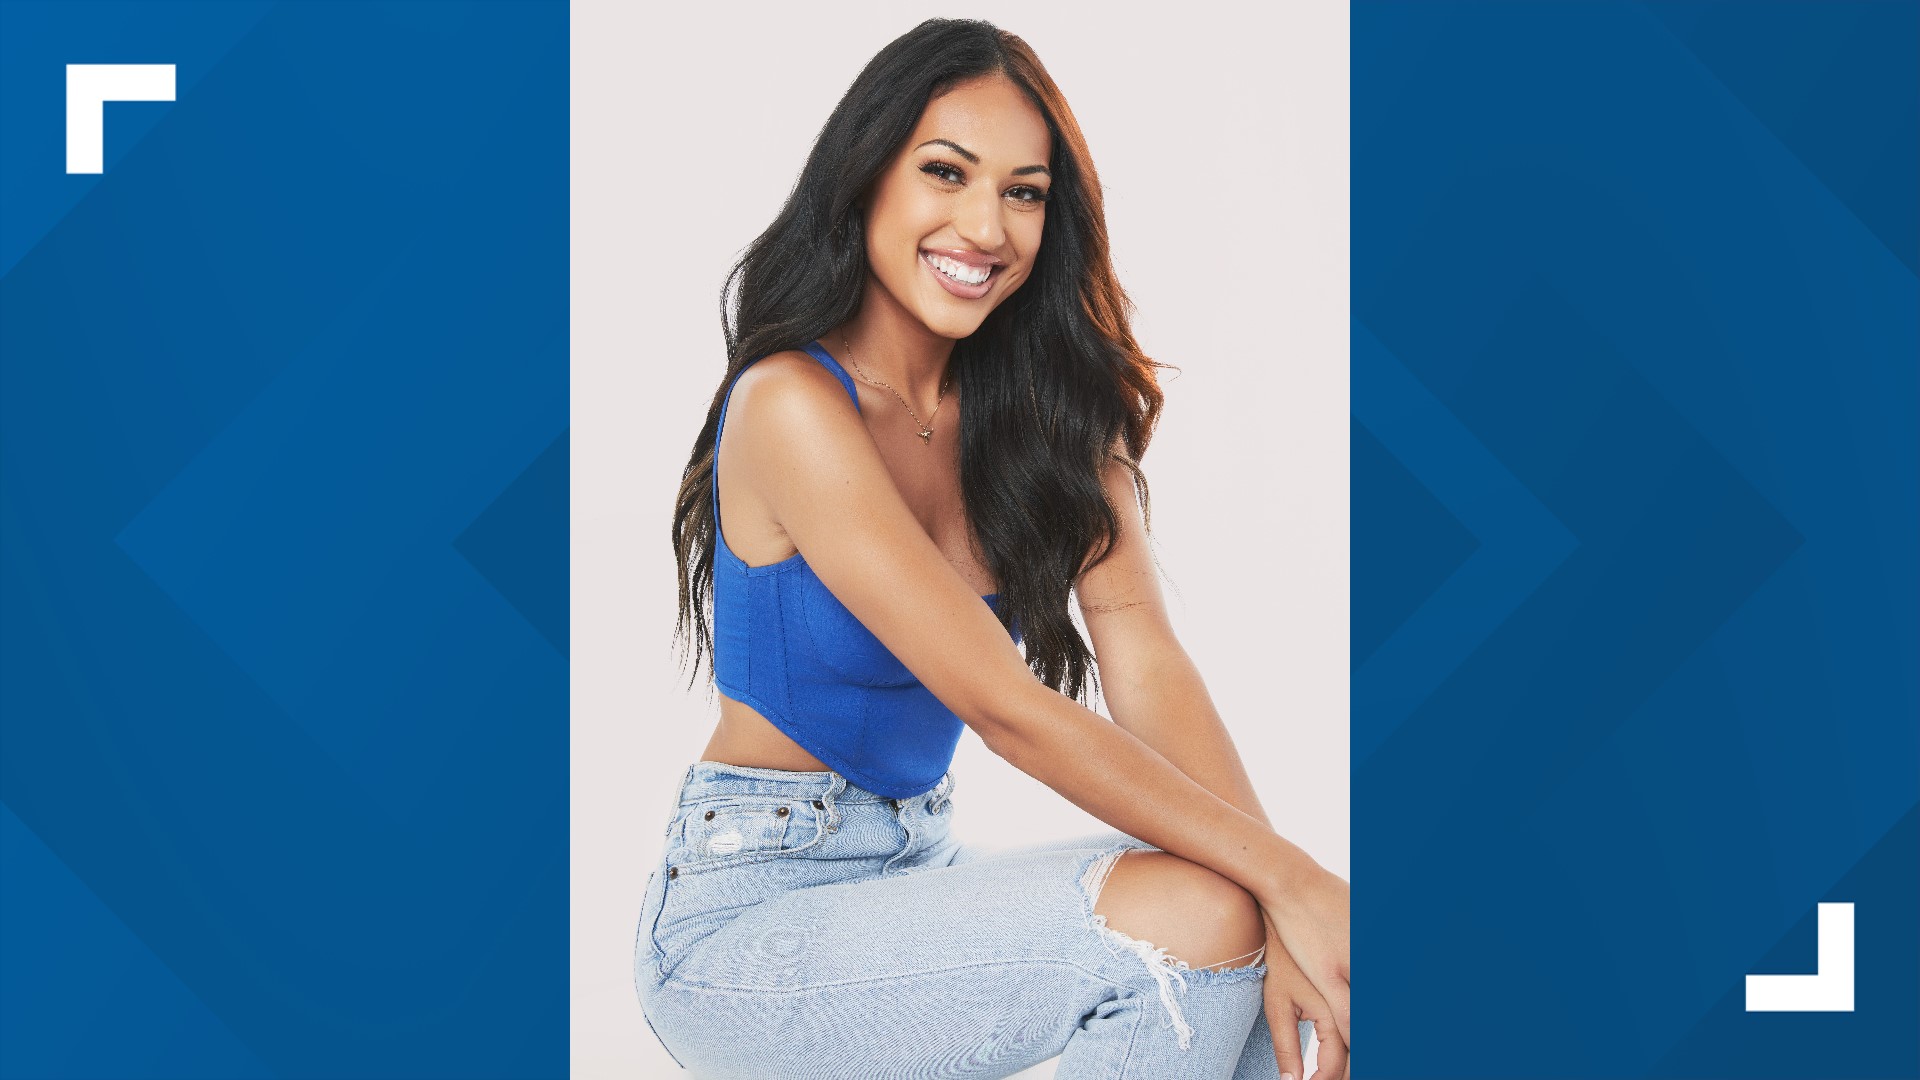 24-year-old Mercedes Northup of Bloomfield will take part in "The Bachelor" Season 27, which airs Mondays at 7 p.m. CST on Local 5 (ABC) starting Jan. 23.